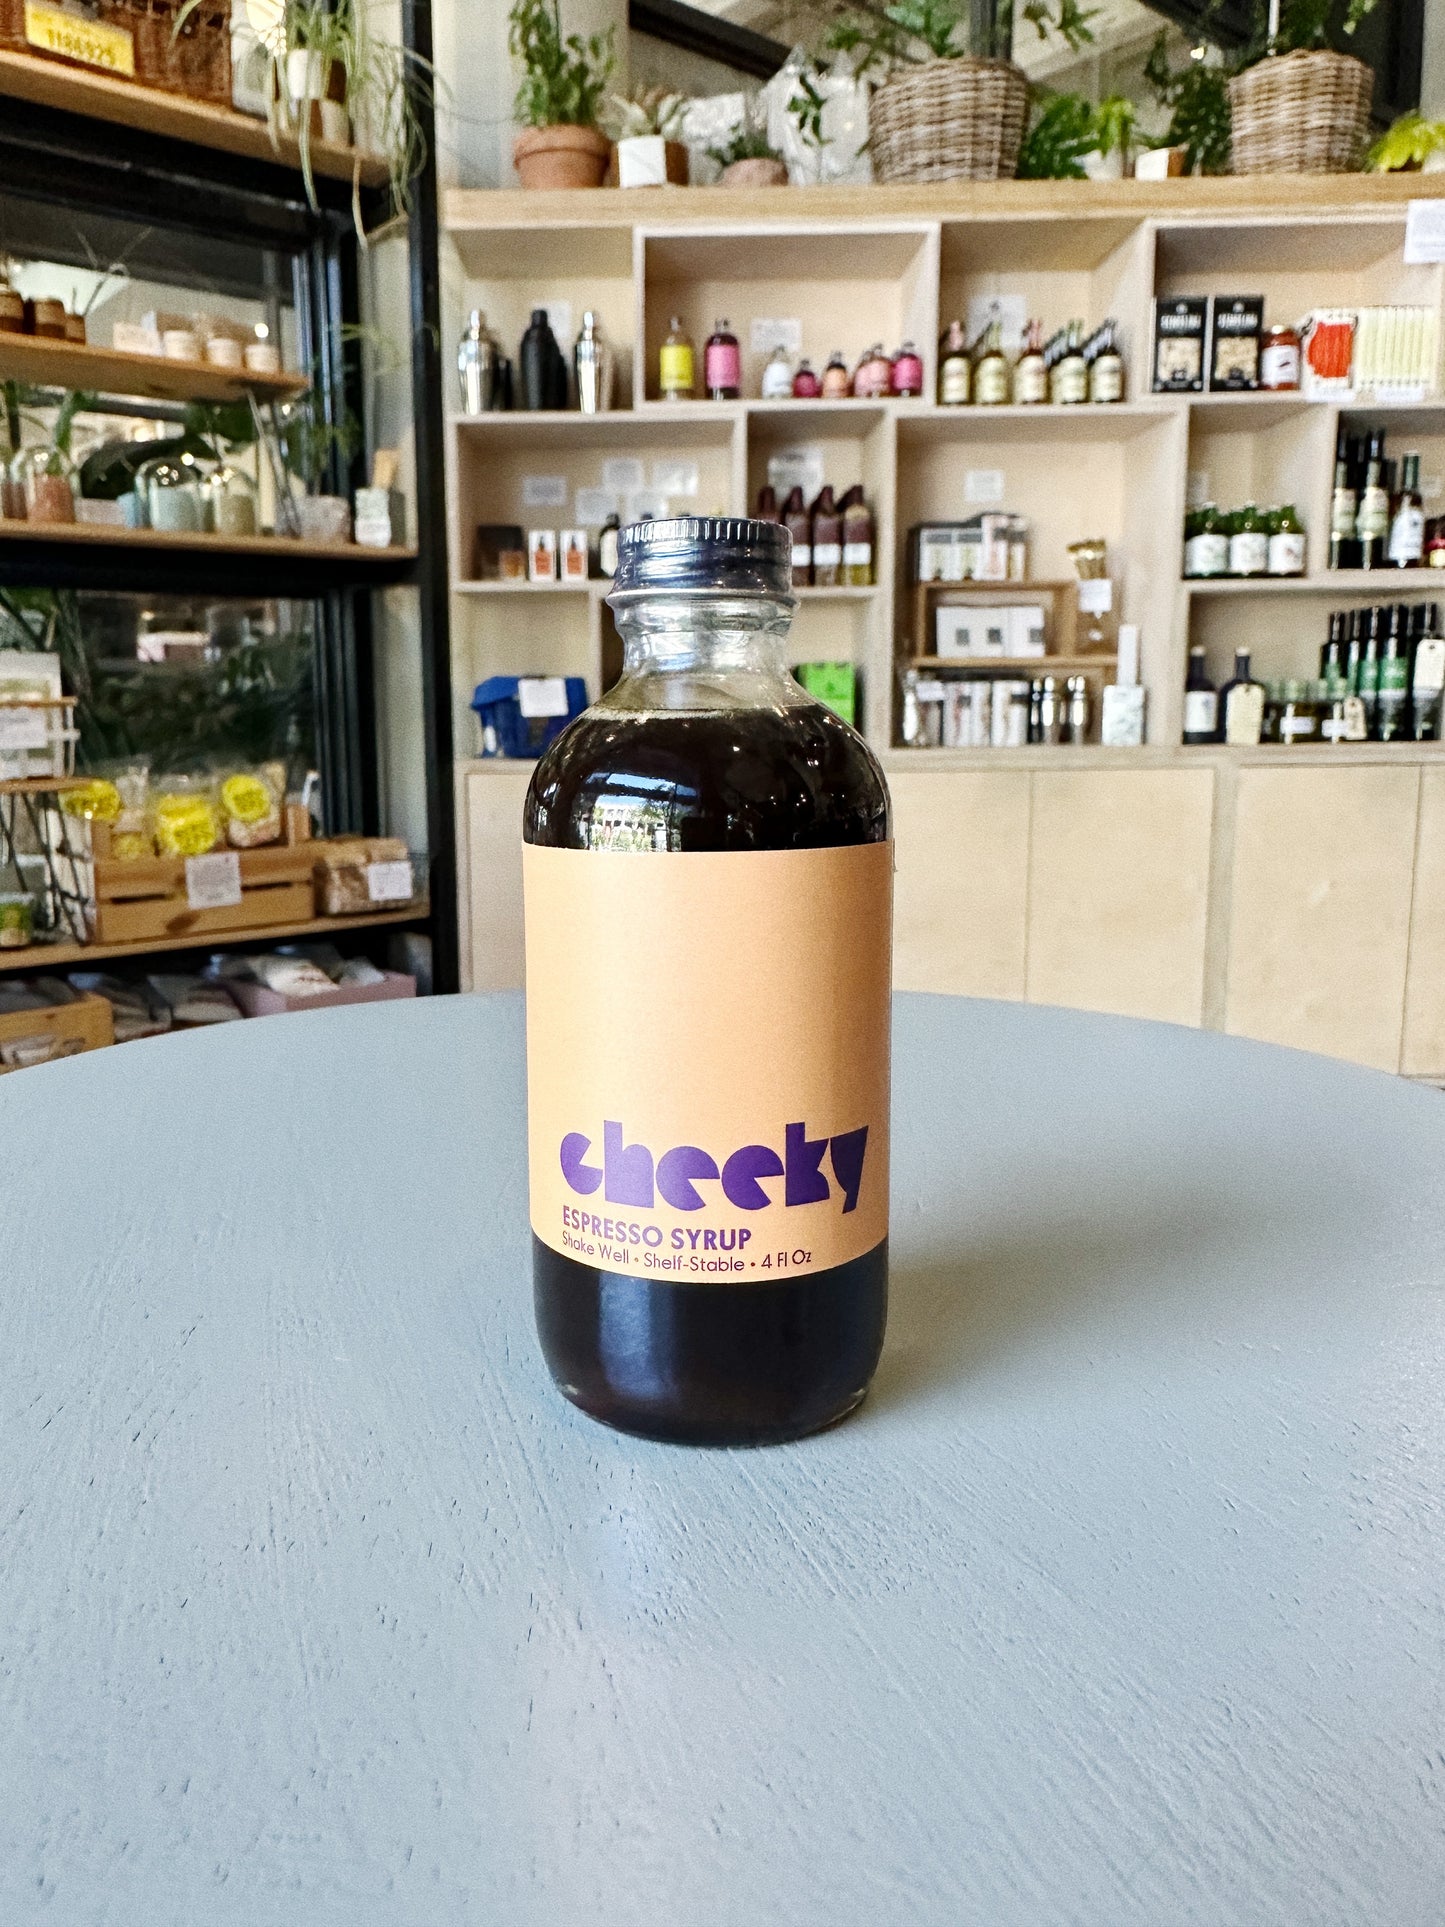 Cheeky Cocktail Syrups & Juices